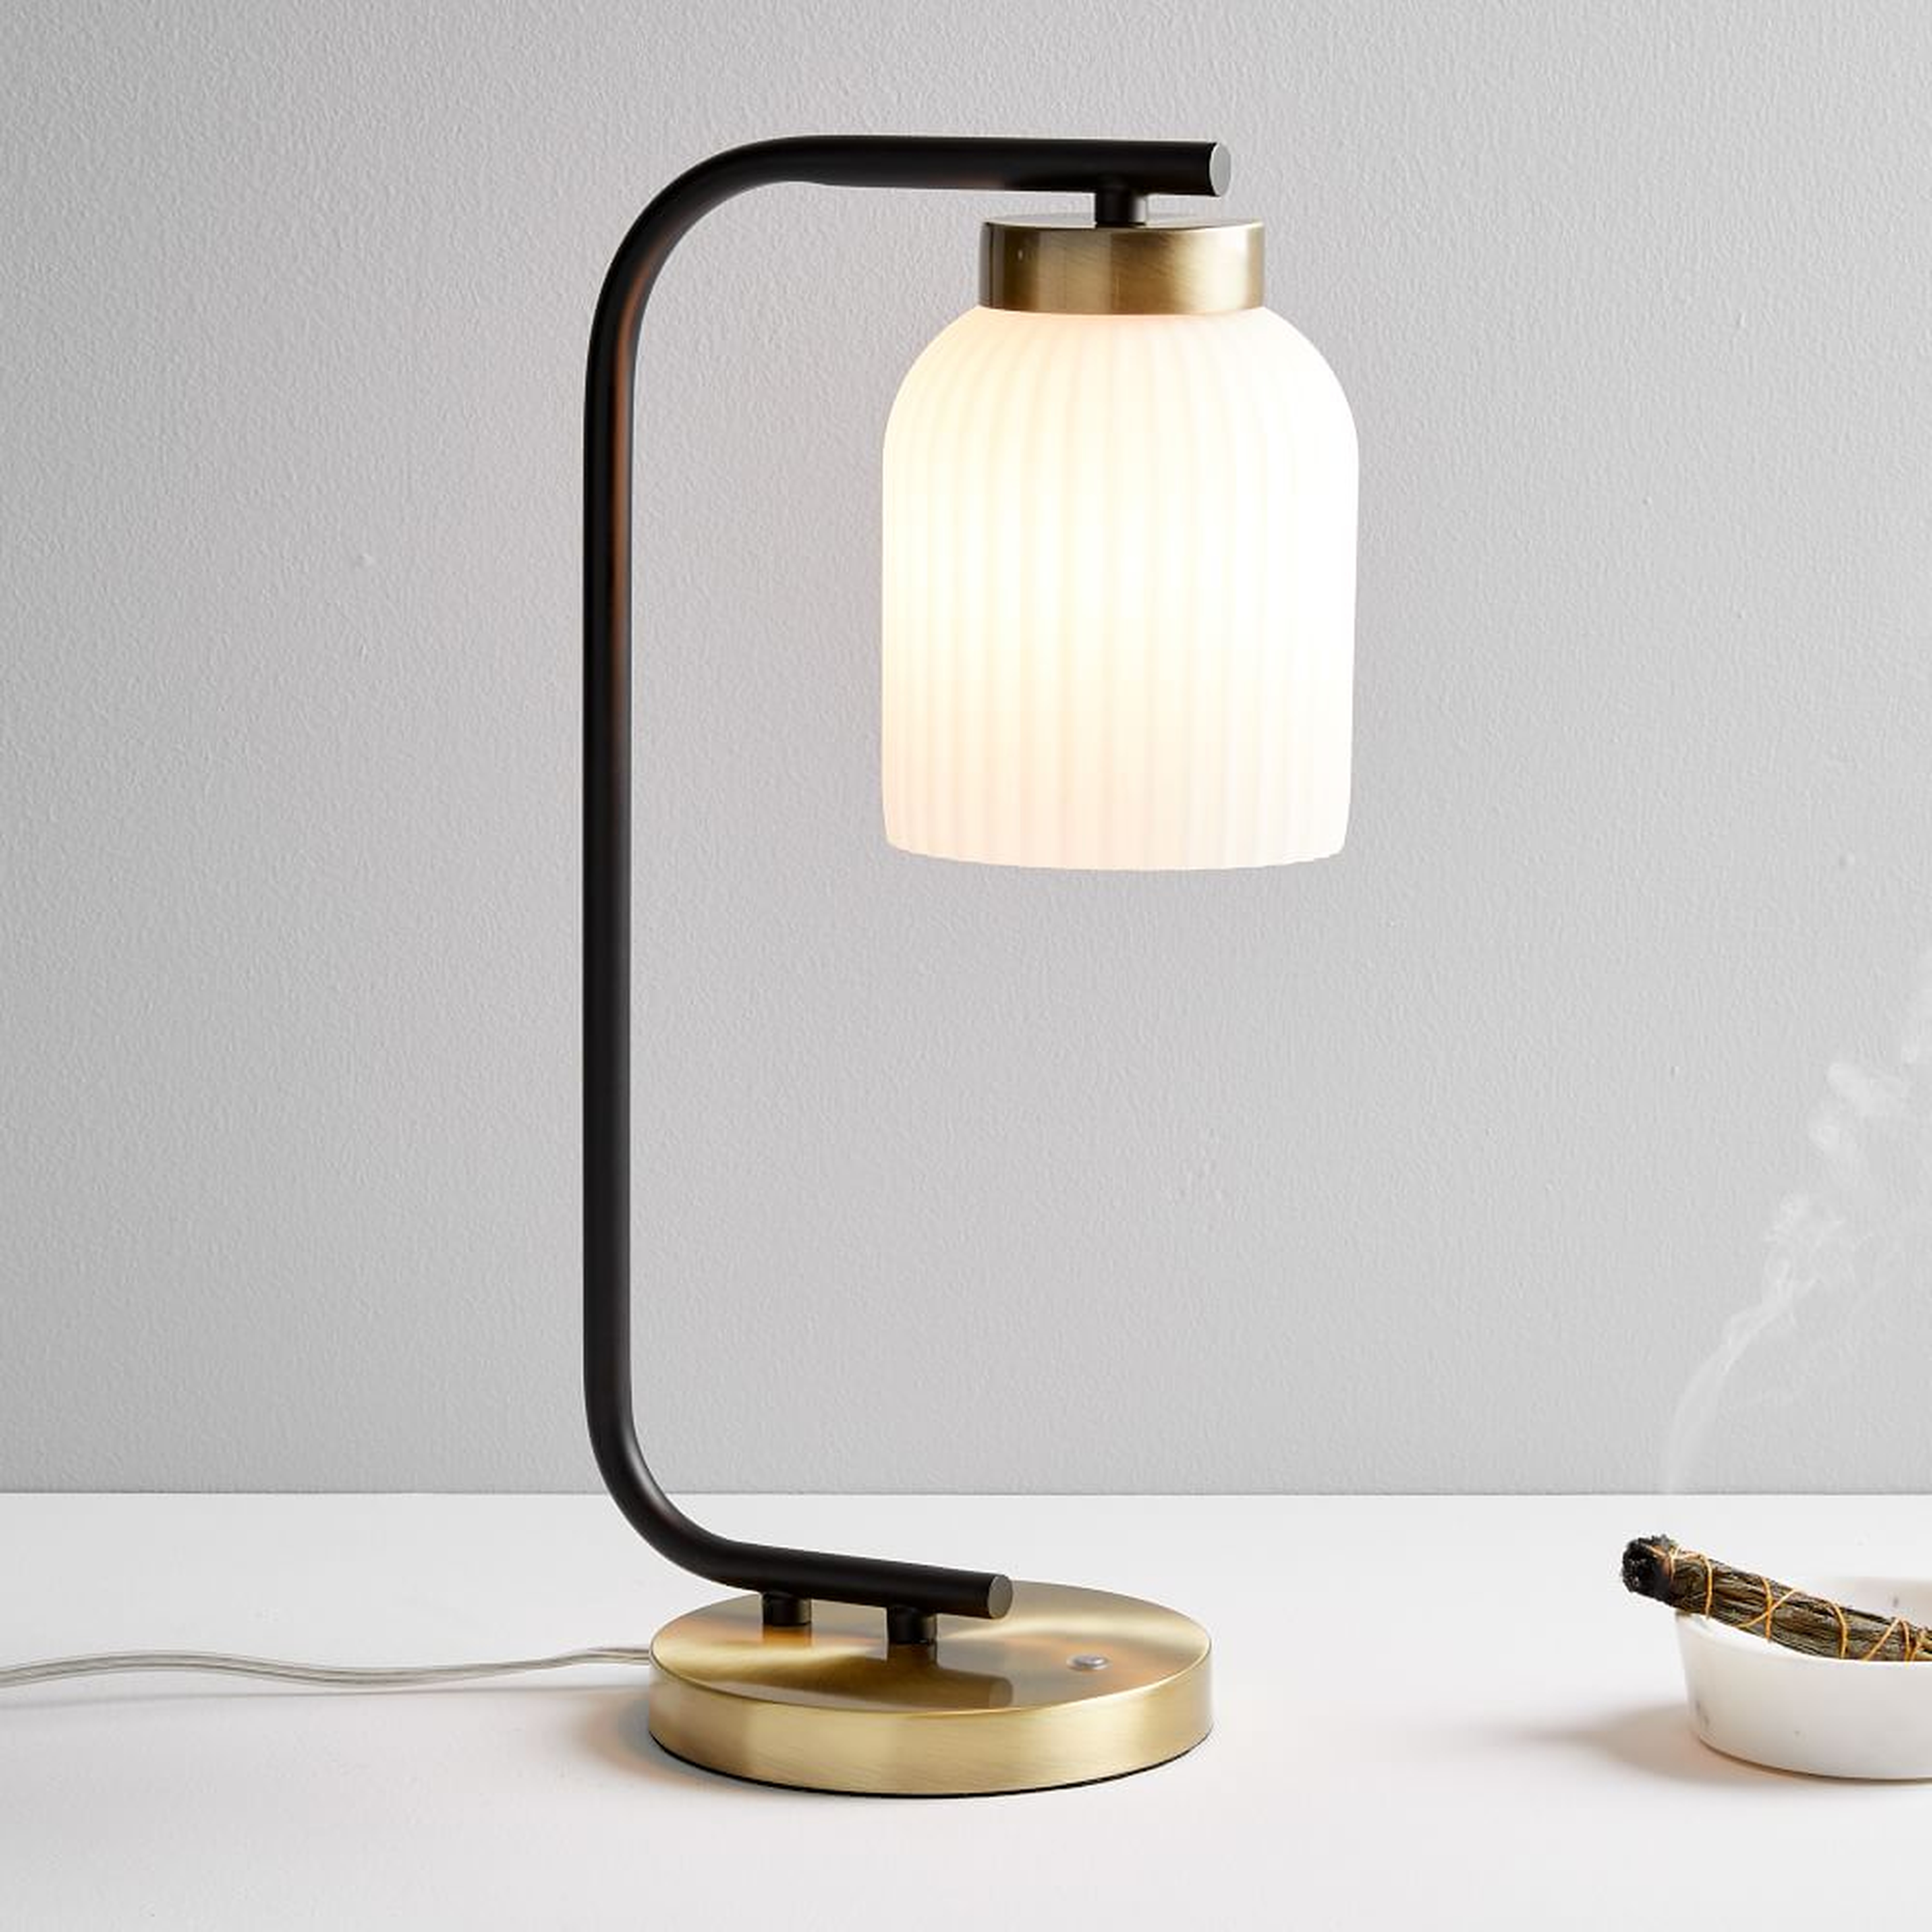 Suspended Glass Table Lamp - West Elm